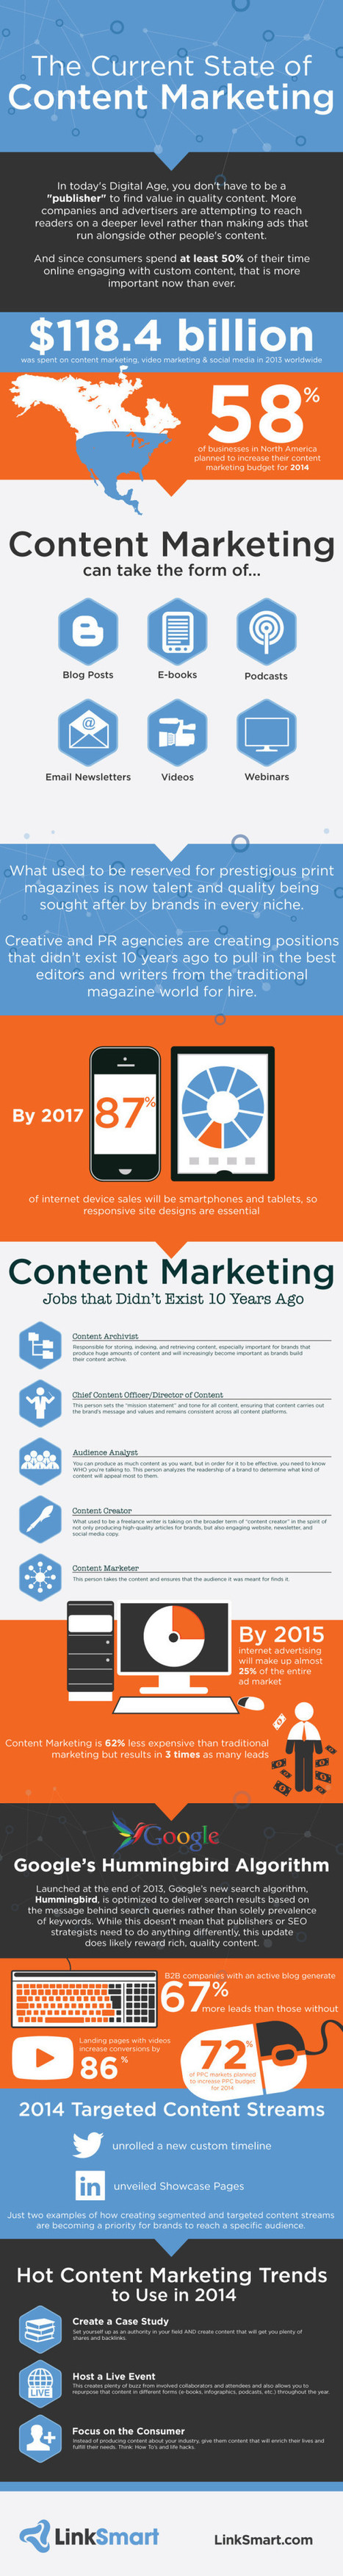 The Current State of Content Marketing 2014 - Marketing Technology Blog | E-Learning-Inclusivo (Mashup) | Scoop.it